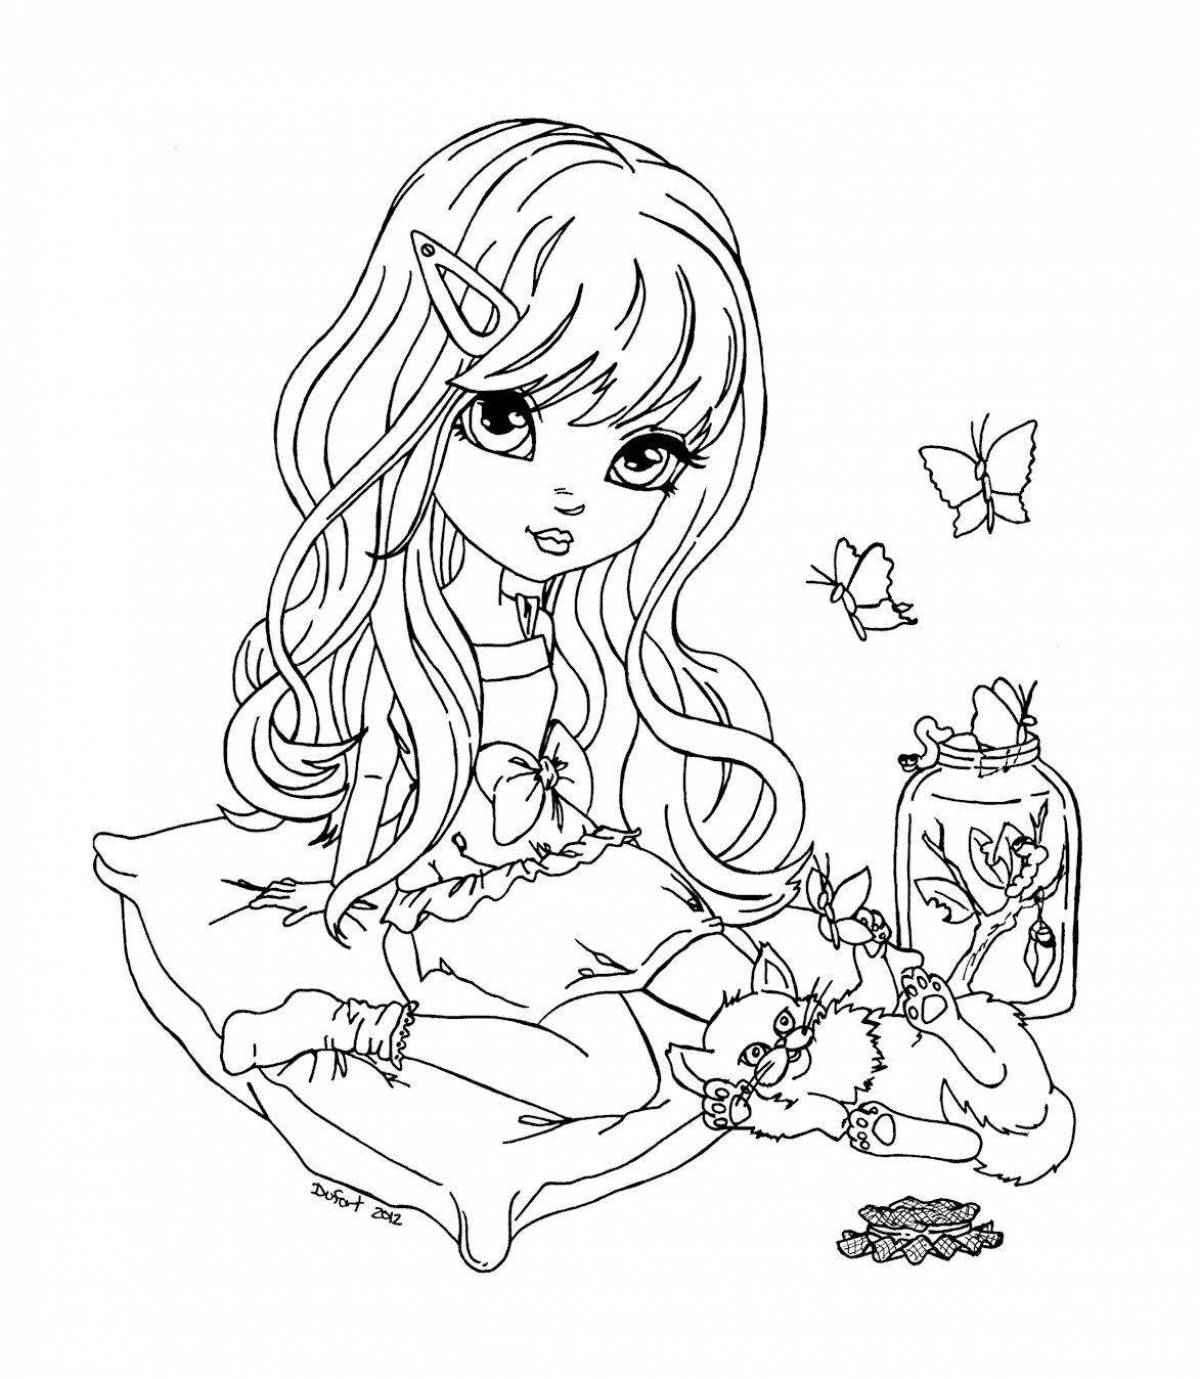 Brilliant coloring page 7 for girls